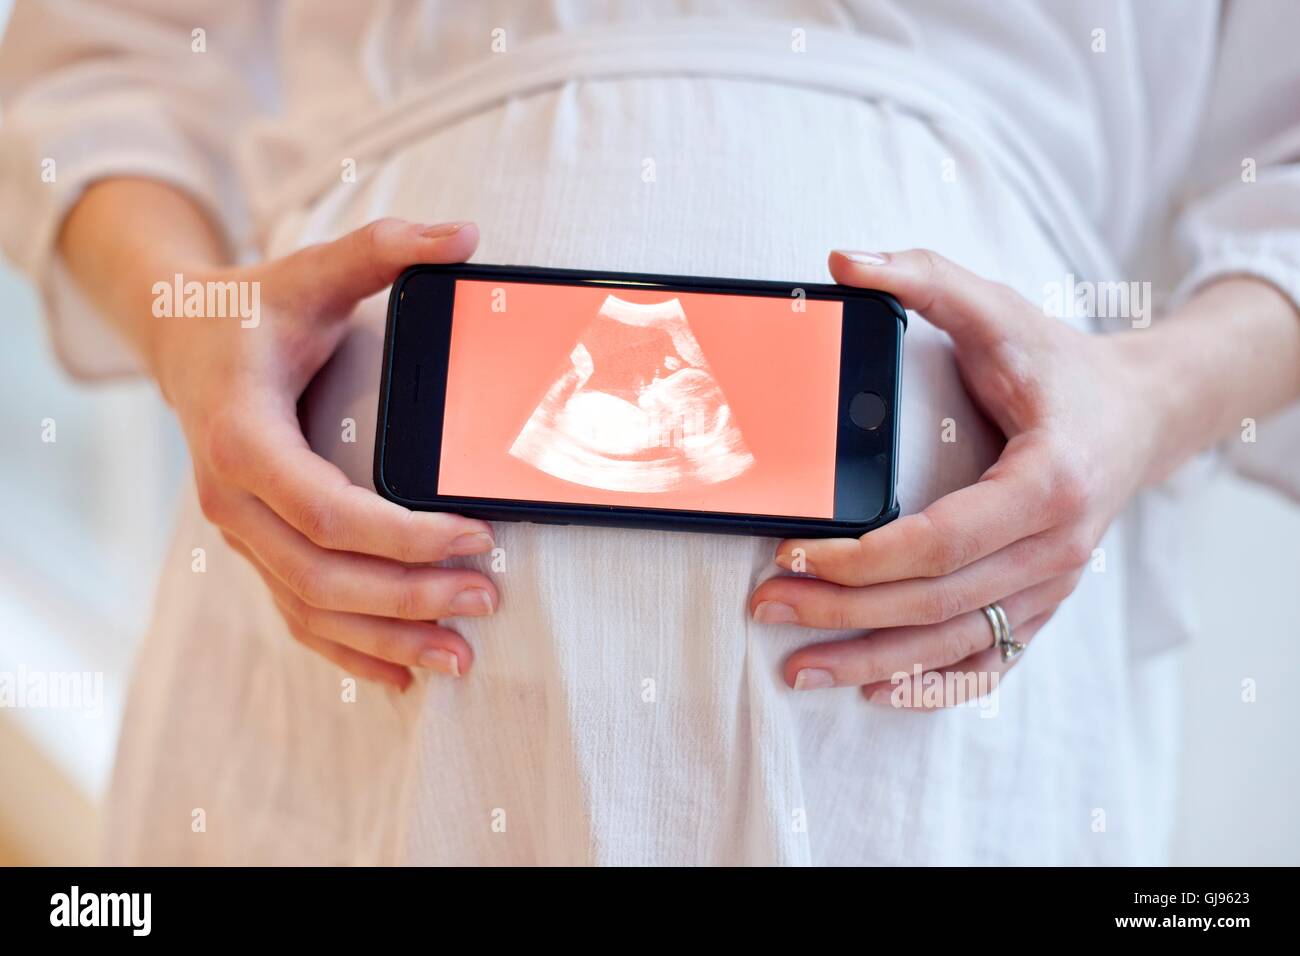 MODEL RELEASED. Pregnant woman holding smartphone with baby scan. Stock Photo